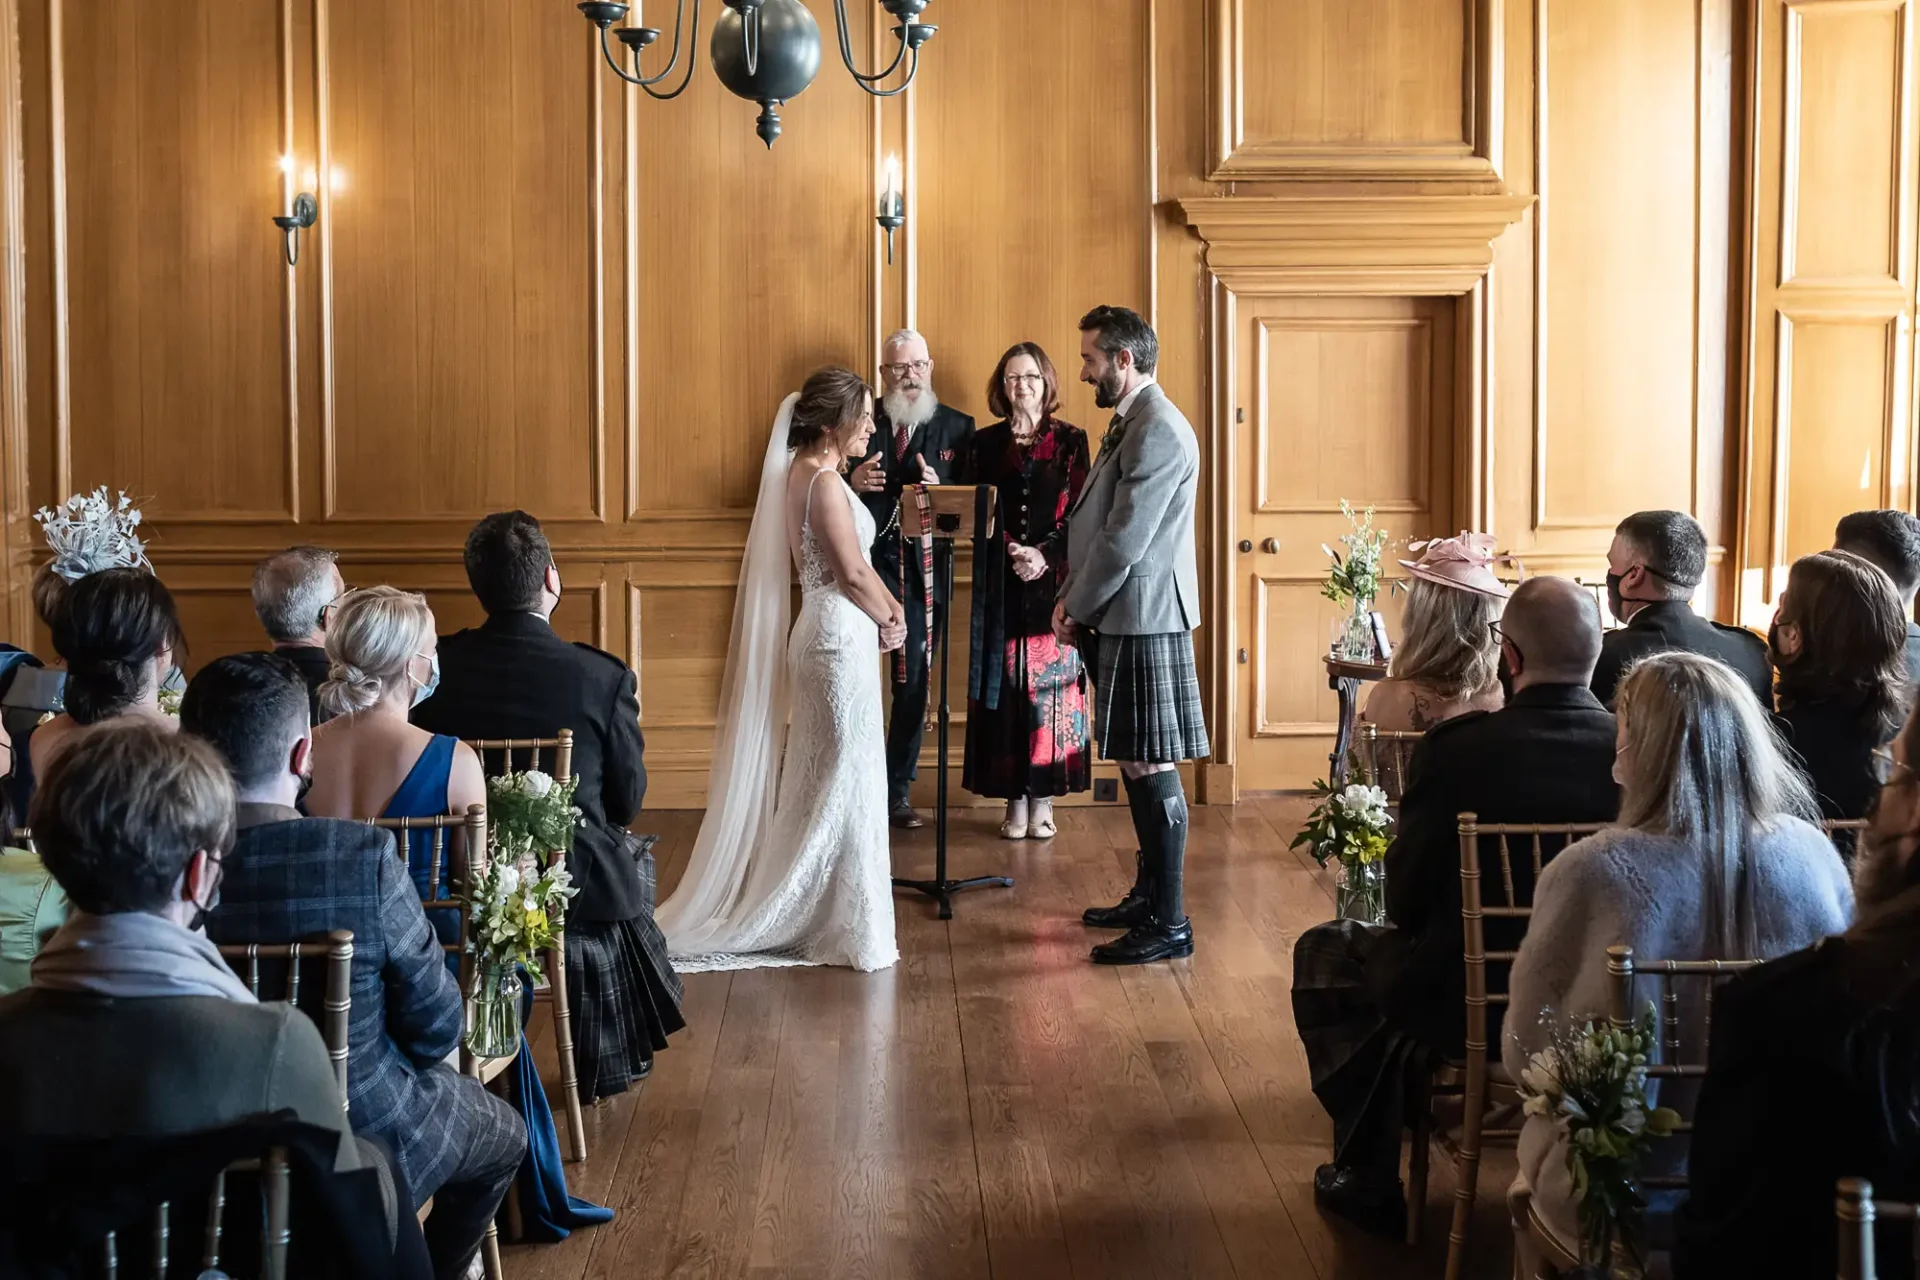 A bride and groom exchange vows at a wedding ceremony in a wood-paneled room with guests seated around them.